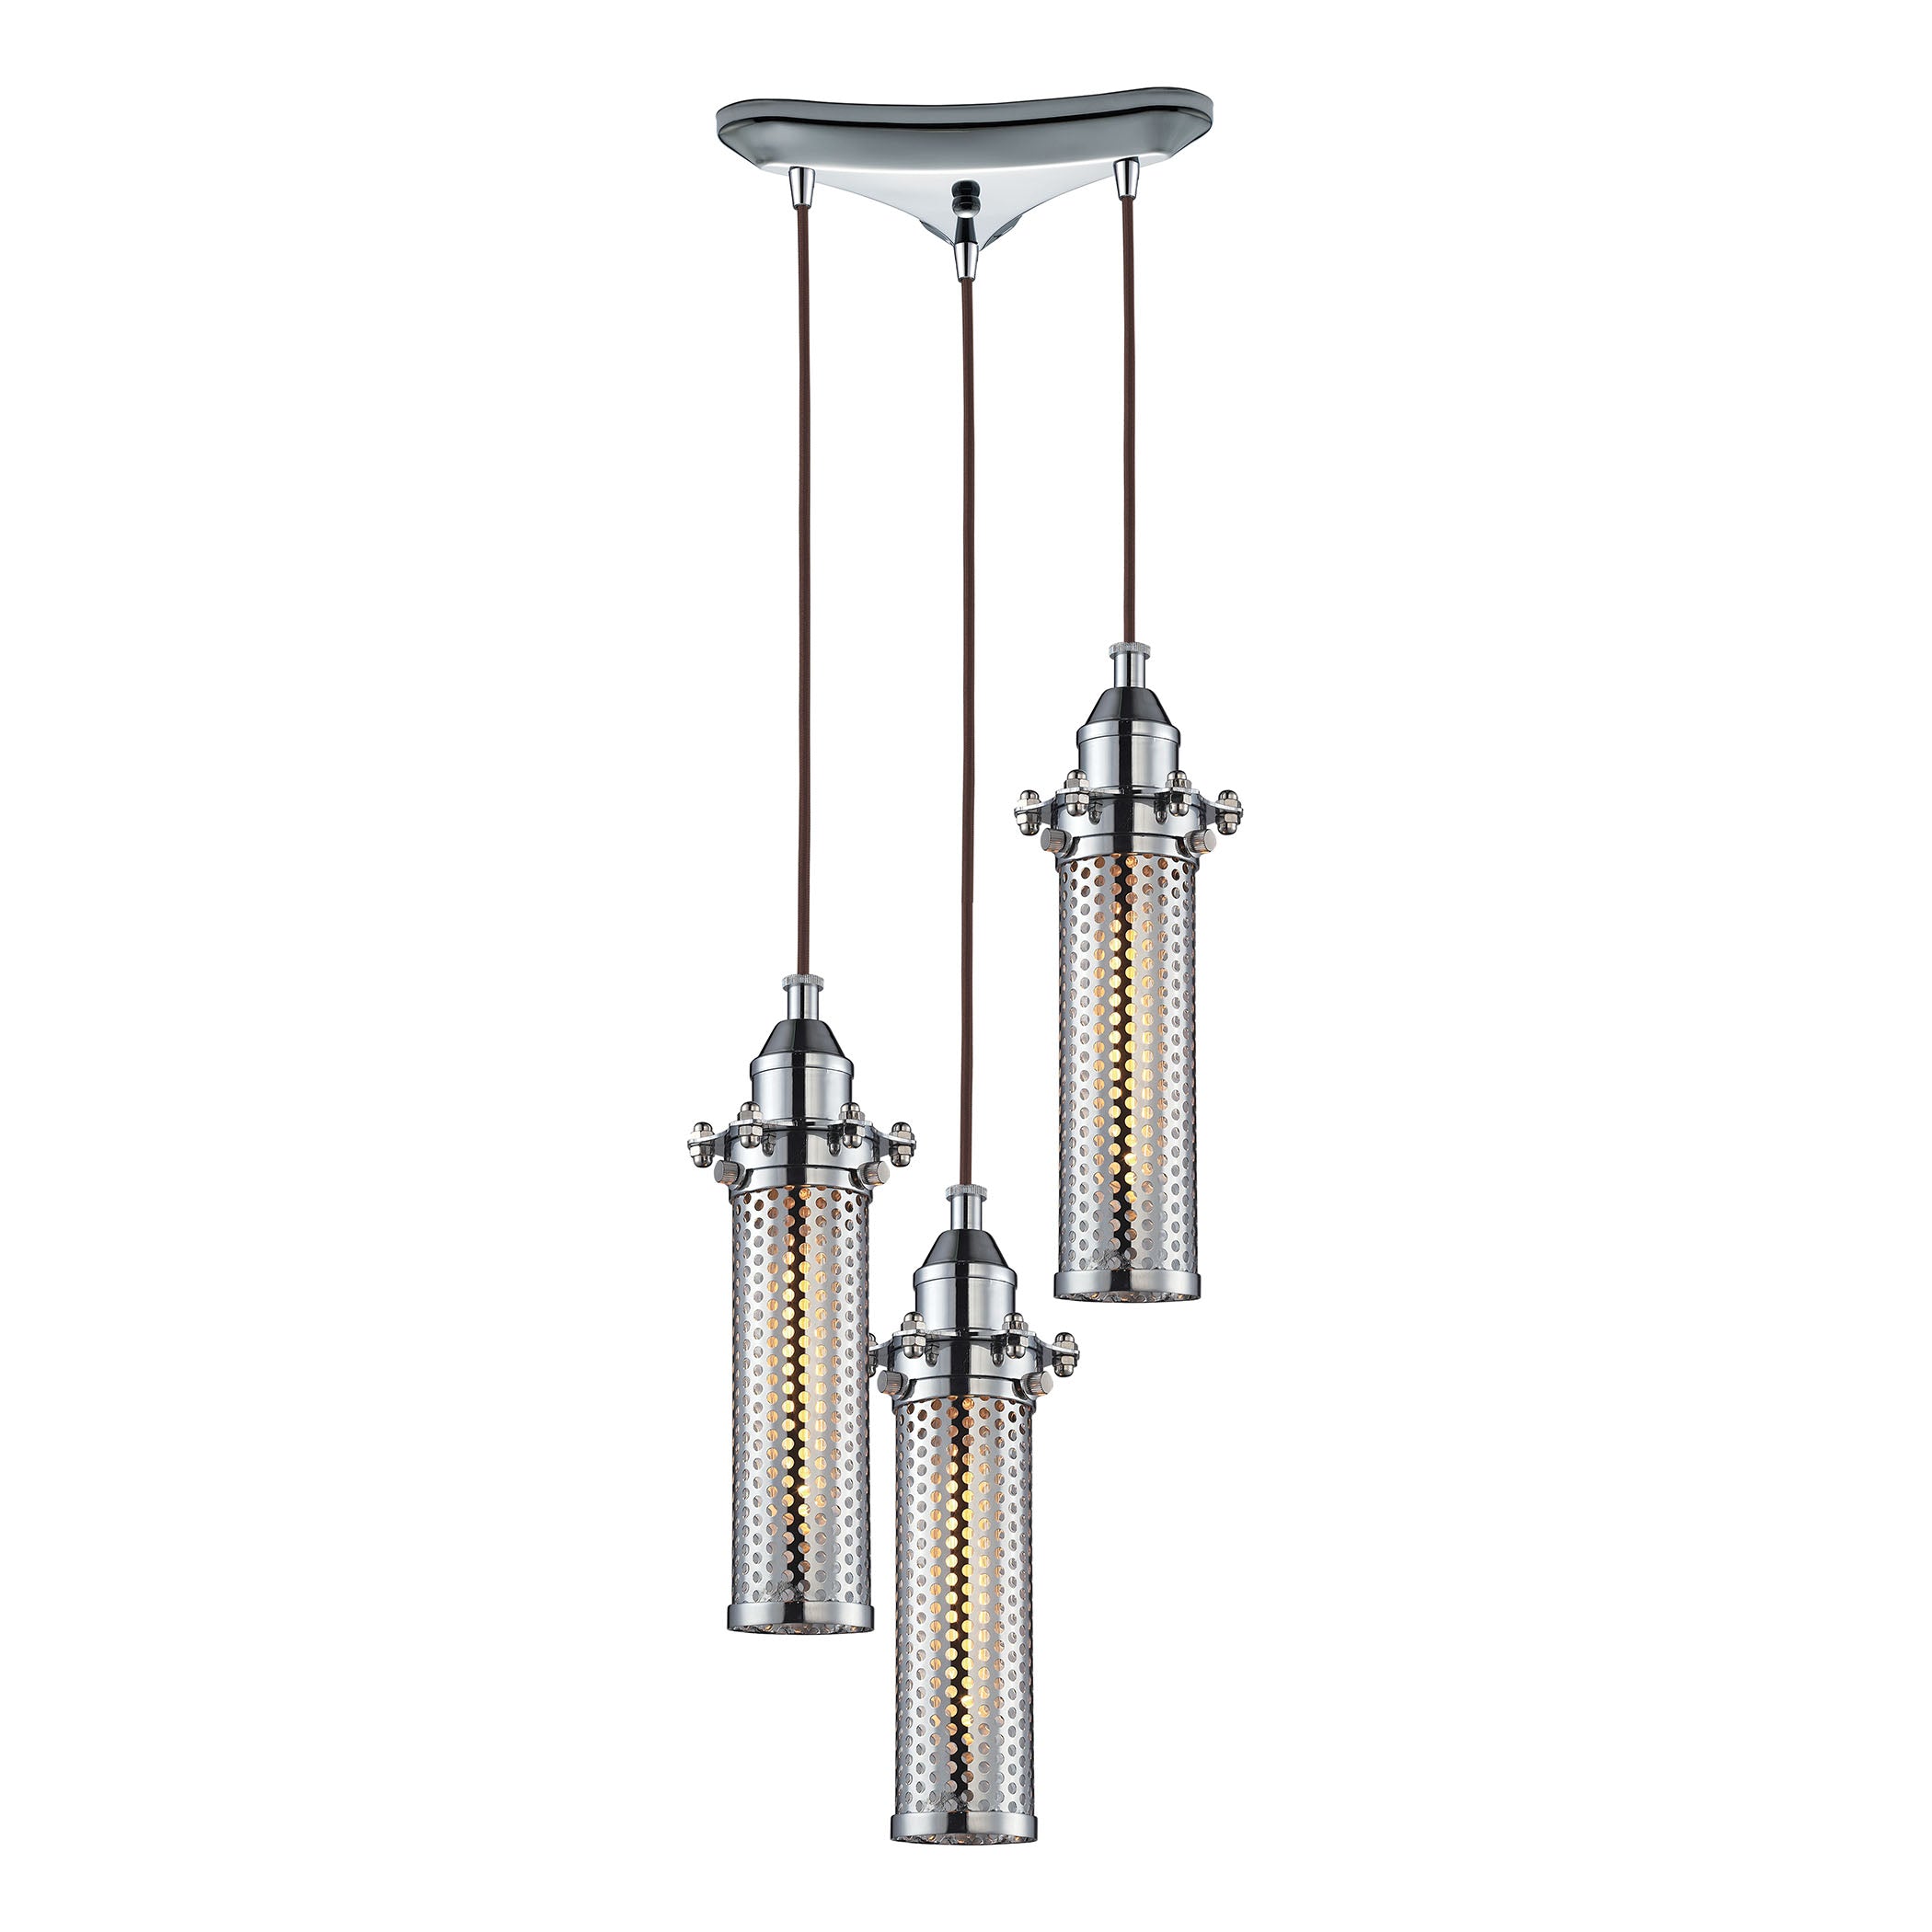 ELK Lighting 66315/3 Fulton 3-Light Triangular Pendant Fixture in Polished Chrome with Perforated Metal Shade